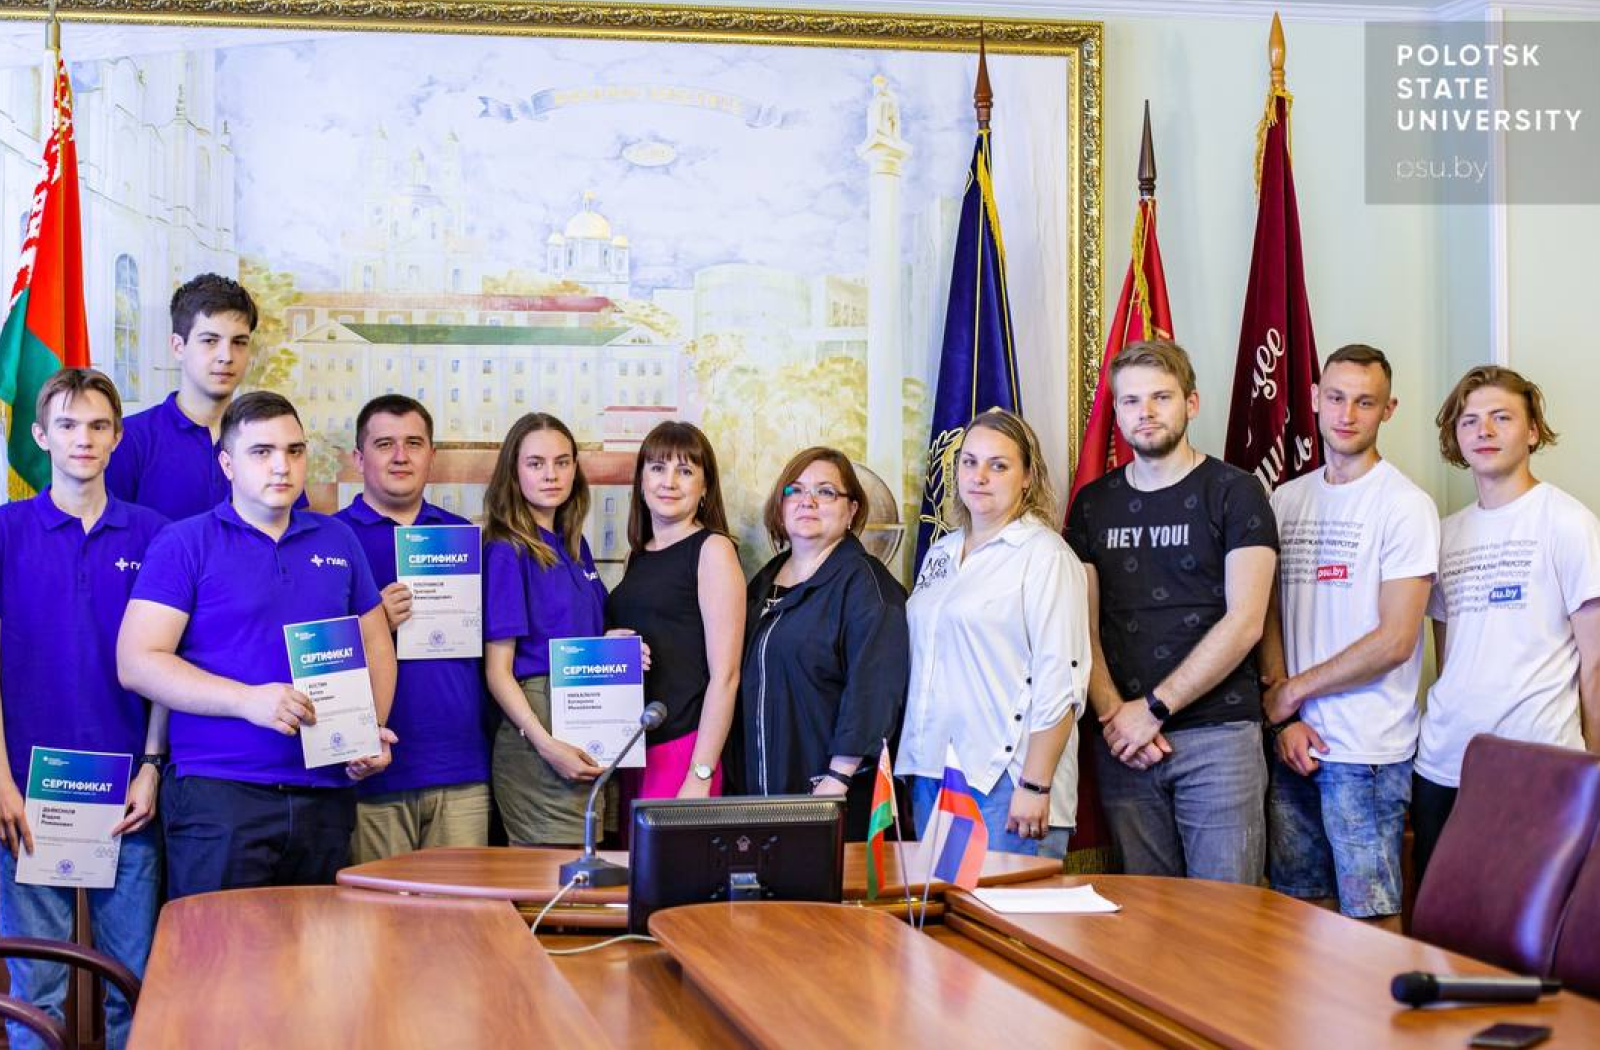 SUAI and Polotsk University held an International Summer School on Information Technology and Robotics for students